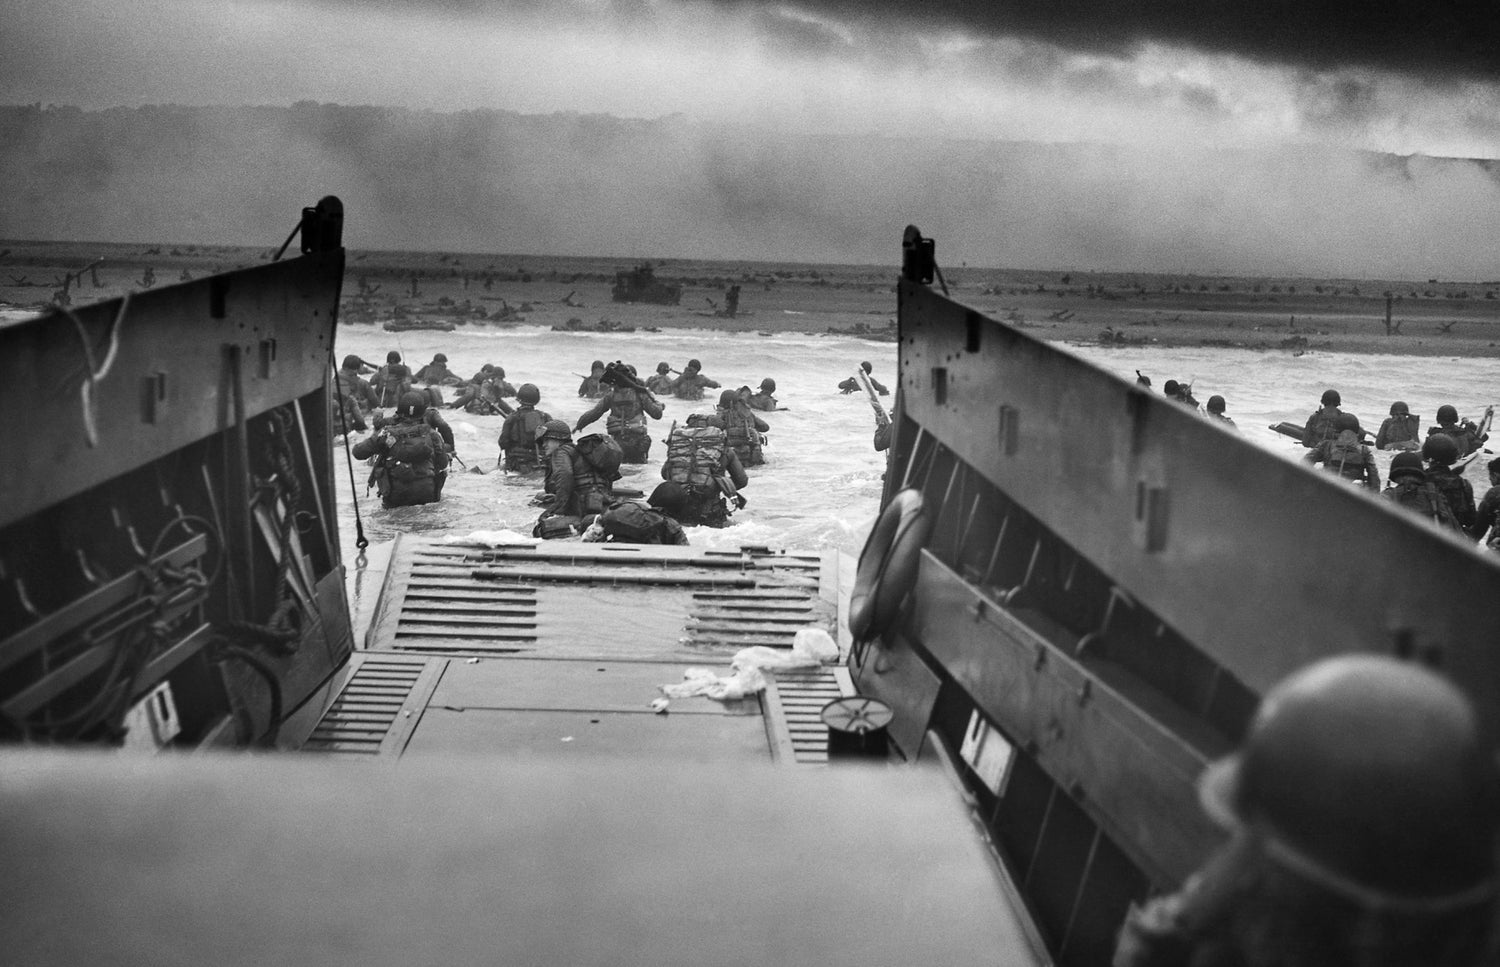 Into the Jaws of Death: A Coast Guard-staffed LCVP from the USS Samuel Chase disembarks Company A, 1st Battalion, 16th Infantry Regiment assaulting Omaha Beach on the morning of 6 June 1944.